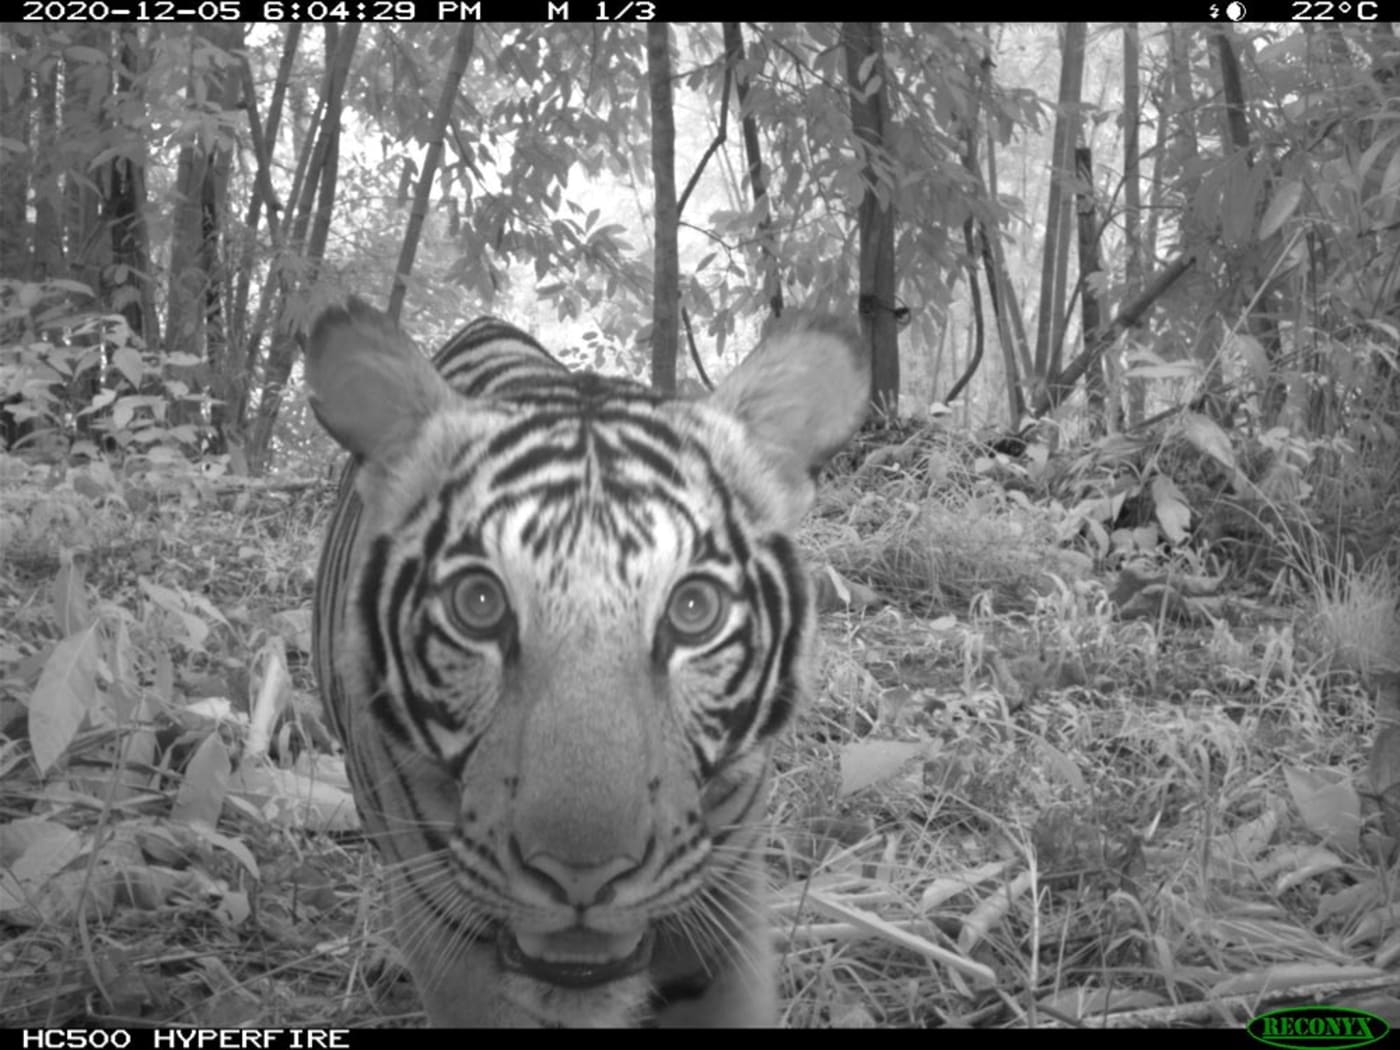 Tiger recorded on camera trap in Malaysia